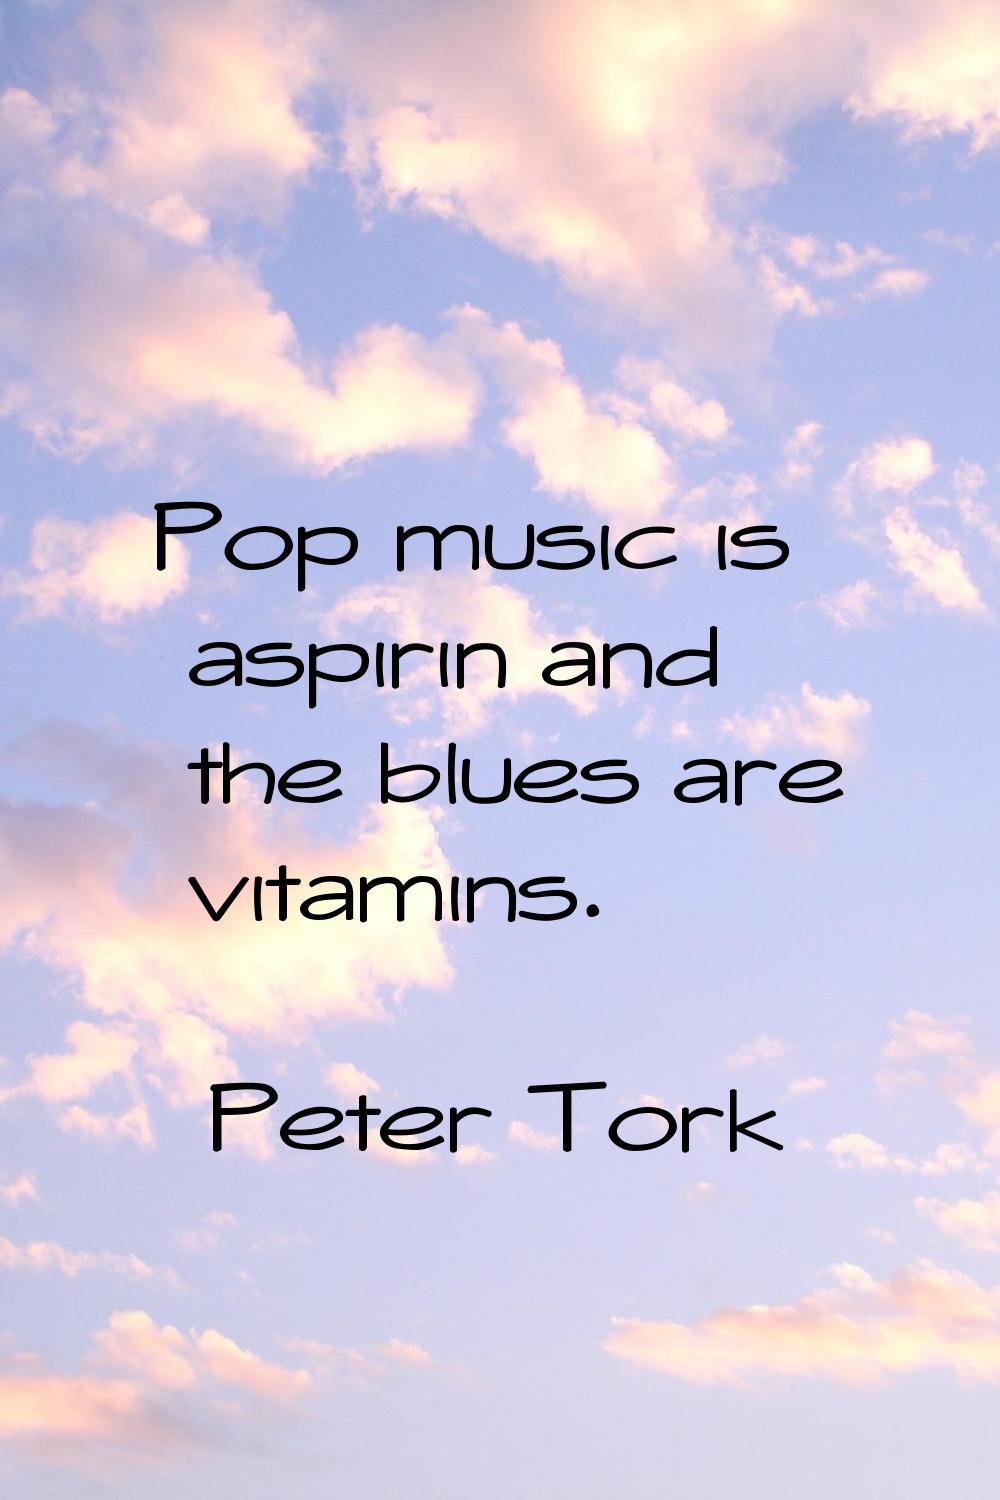 Pop music is aspirin and the blues are vitamins.